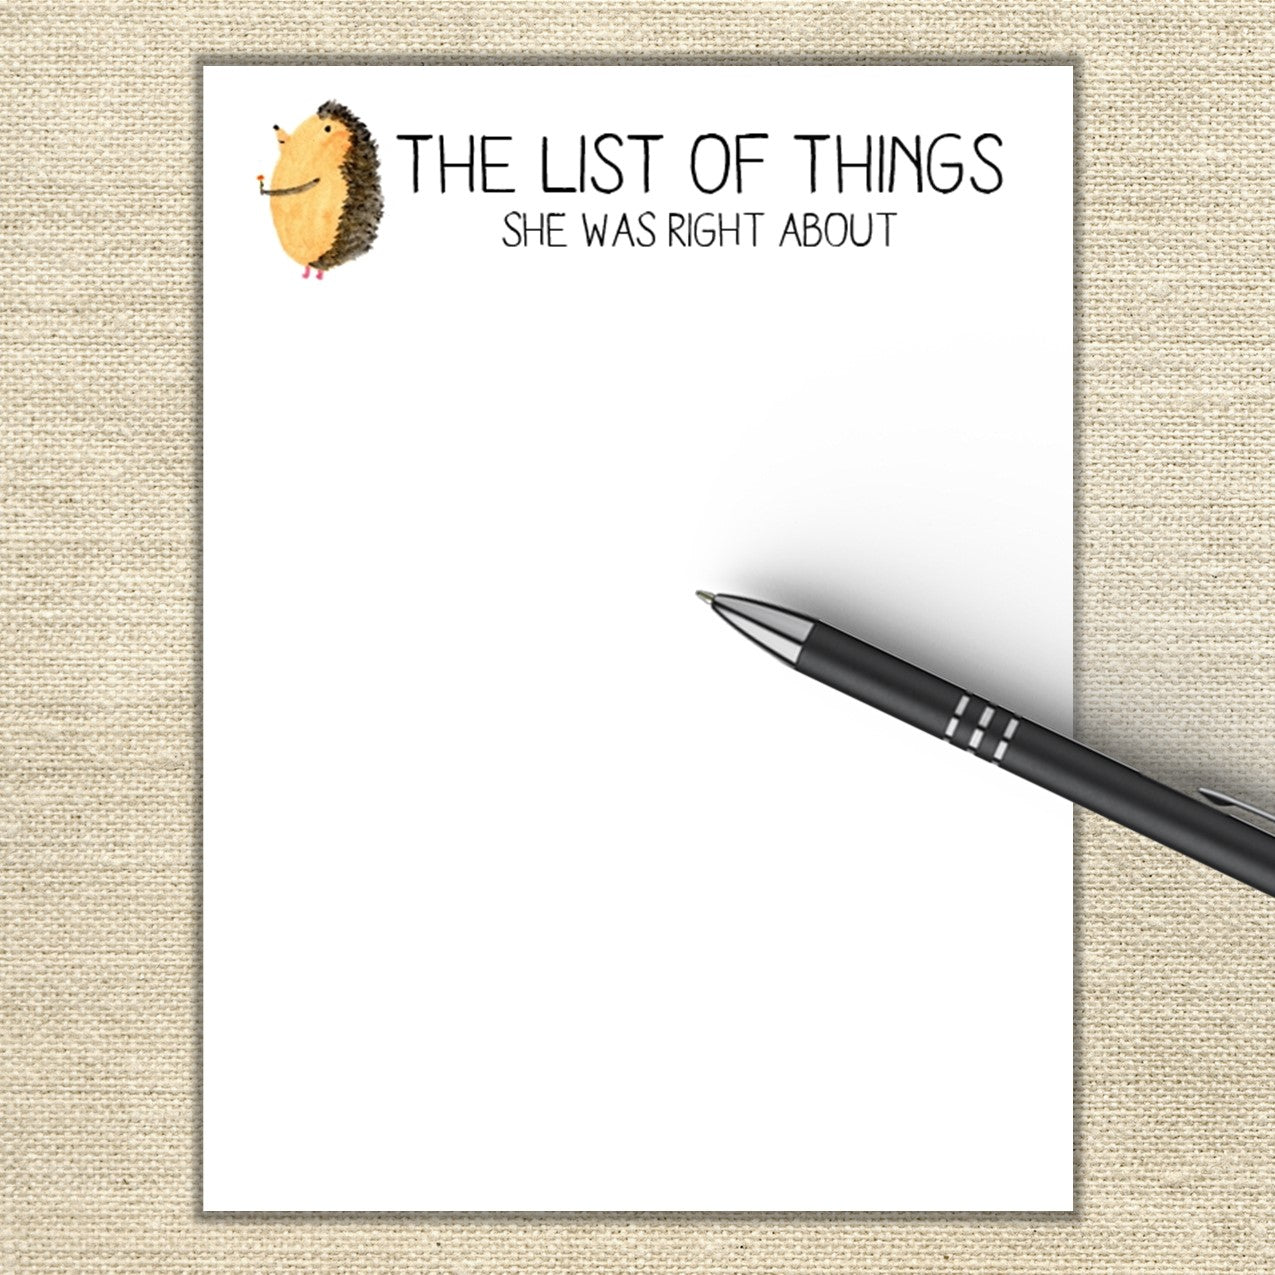 The List of Things She Was Right